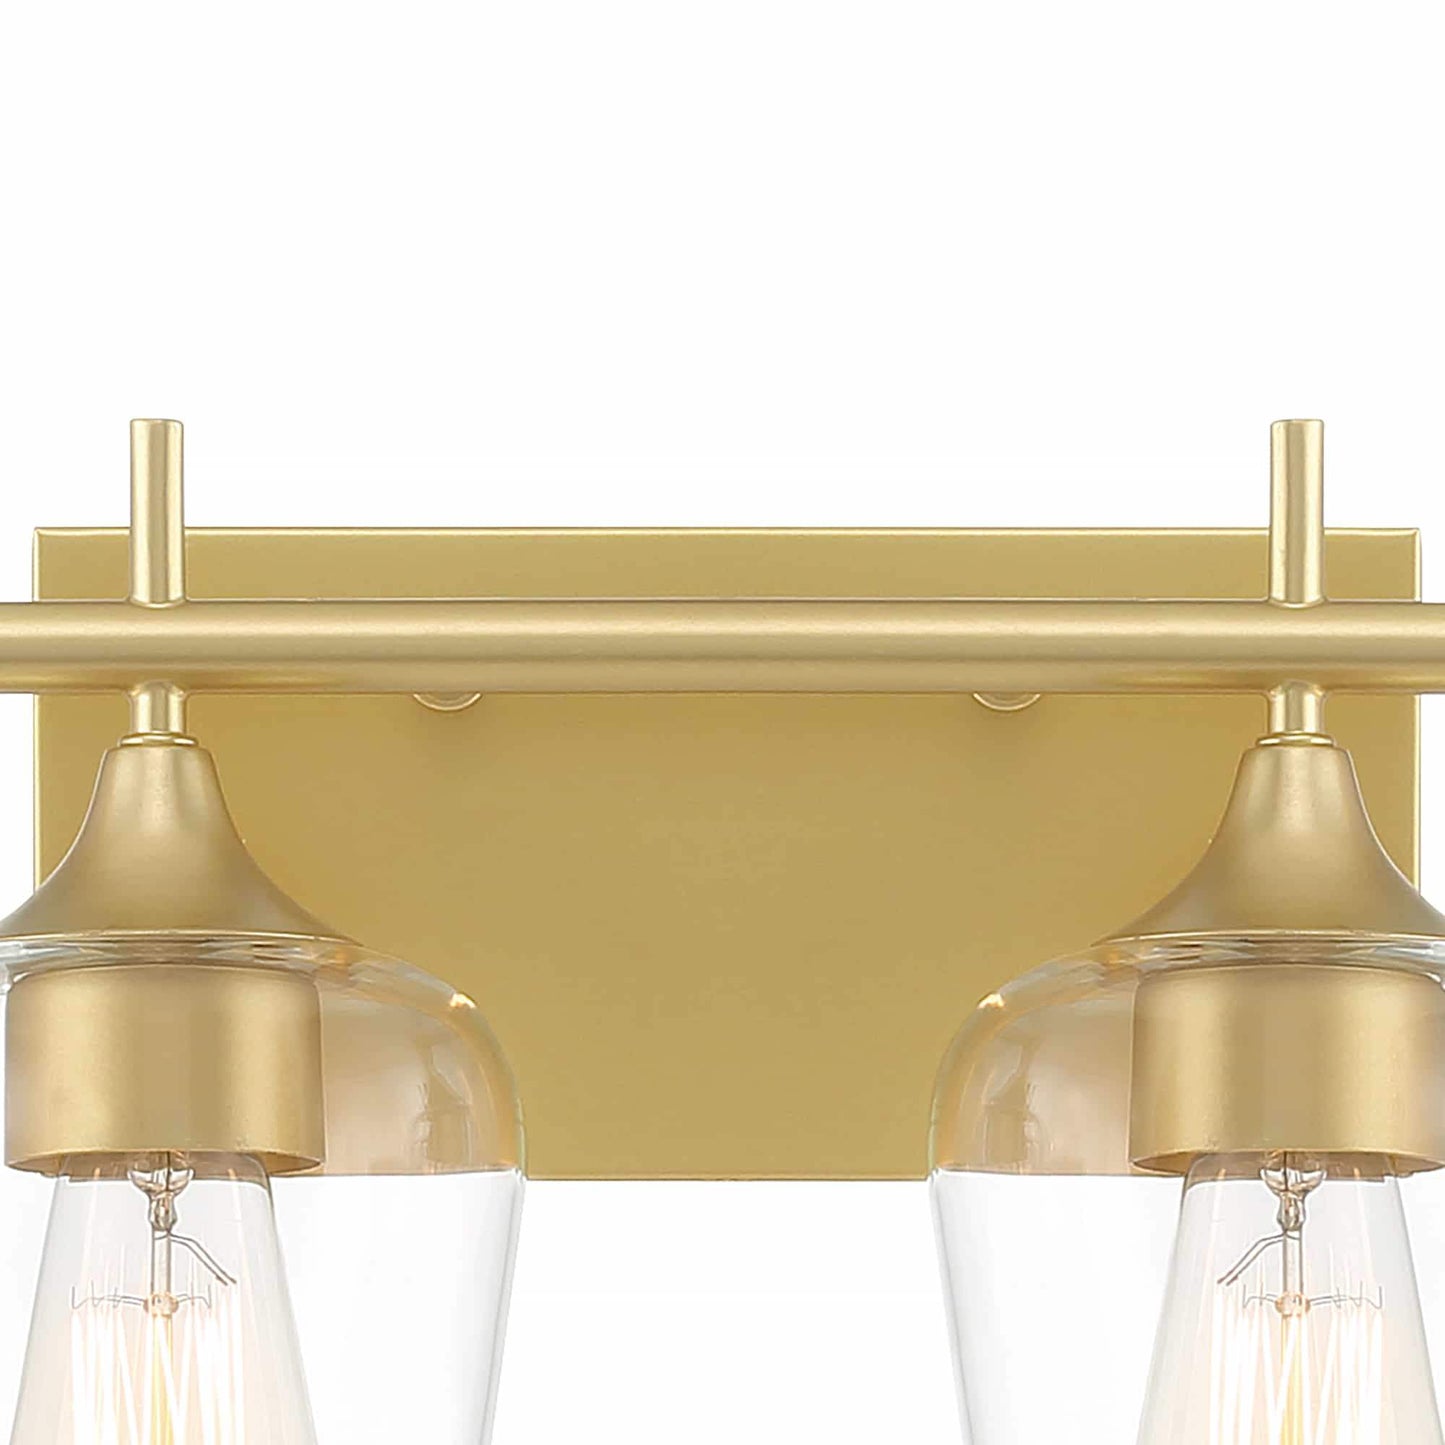 3436 | 6 - Light Dimmable Vanity Light by ACROMA™ UL - ACROMA